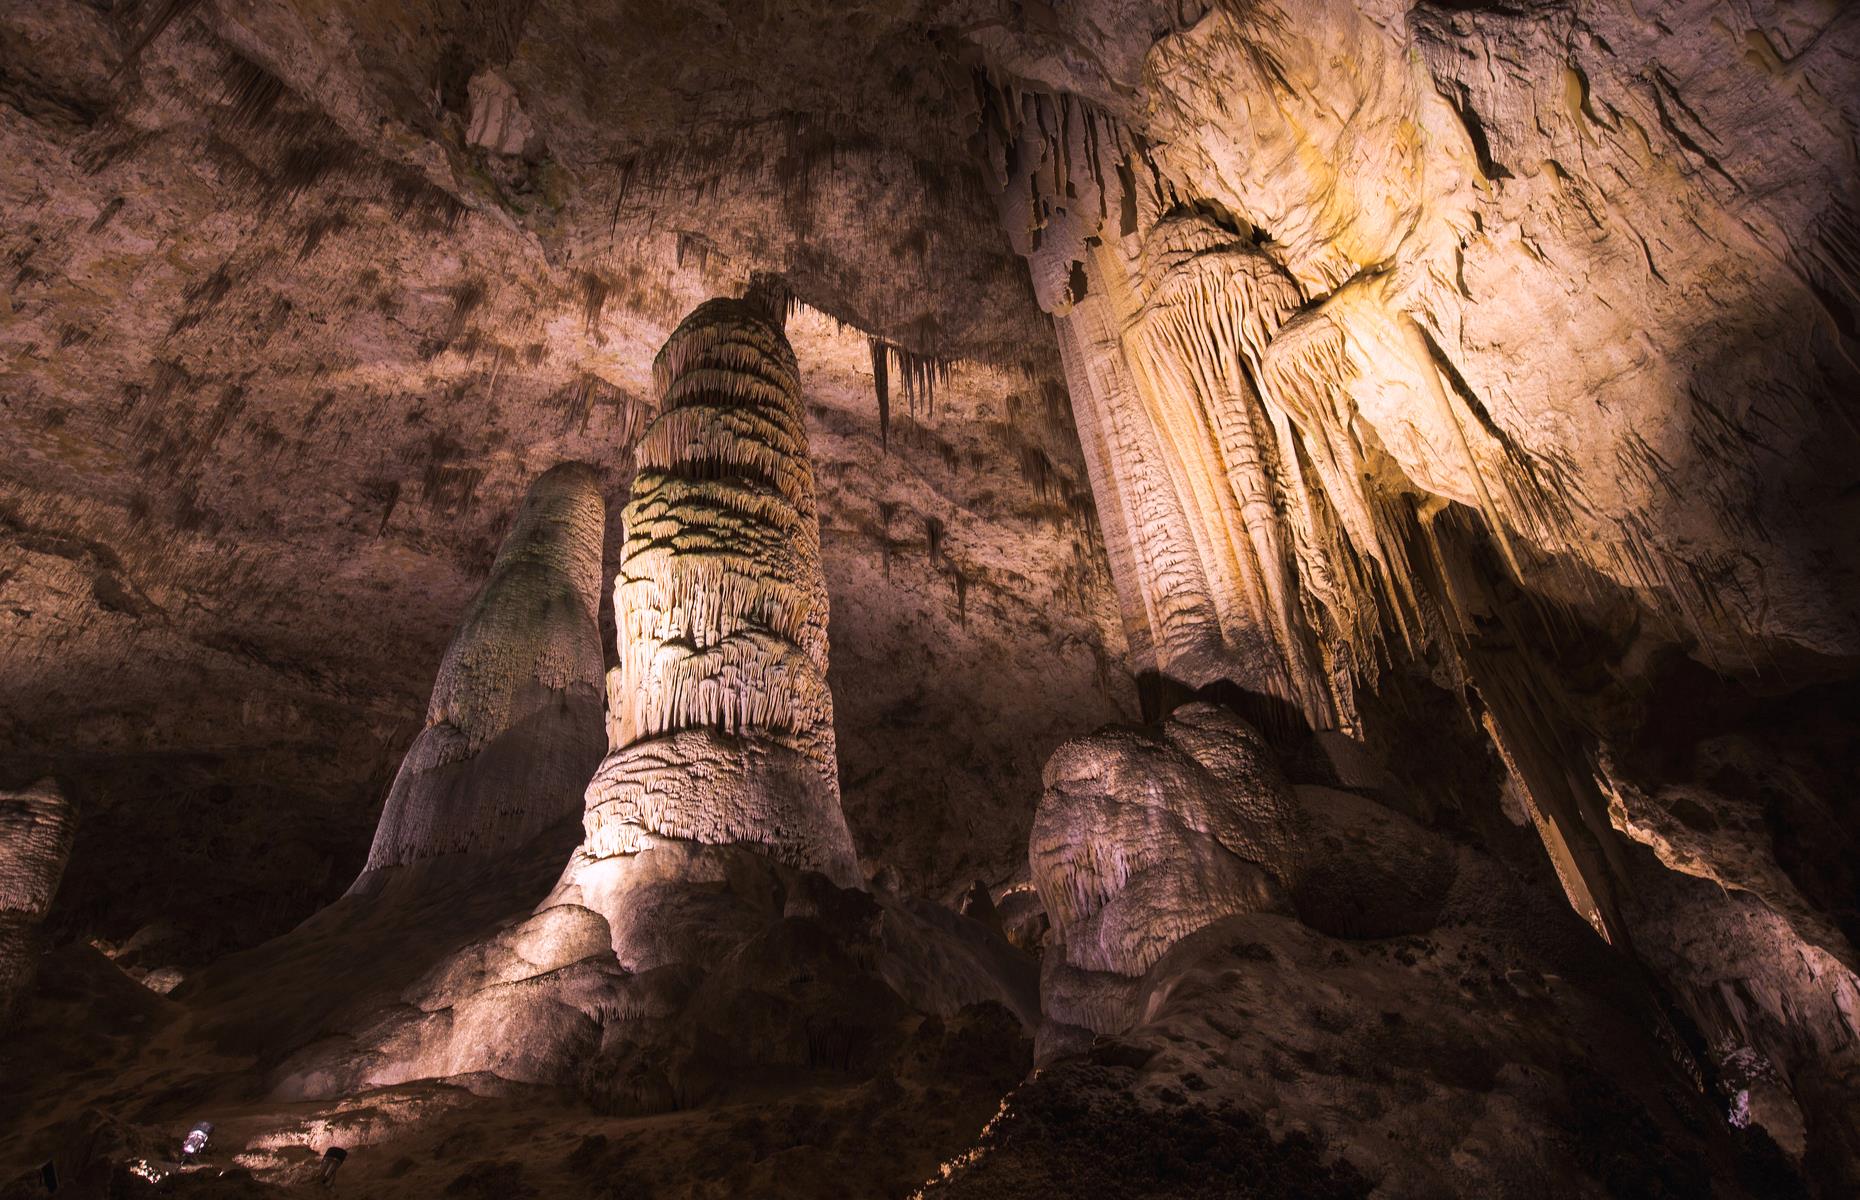 <p>Over 119 caves make up New Mexico’s <a href="https://www.nps.gov/cave/index.htm">Carlsbad Caverns</a>. Within this vast cave network, 750-feet (229m) deep underground, is the so-called Big Room, a chamber so huge it could hold over six football pitches. The caves are home to half a million bats who can be seen swirling out into the night sky at dusk. Entry tickets are <a href="https://www.nps.gov/cave/planyourvisit/reopening.htm">currently limited</a> due to COVID-19 and available on a first-come, first-serve basis.</p>